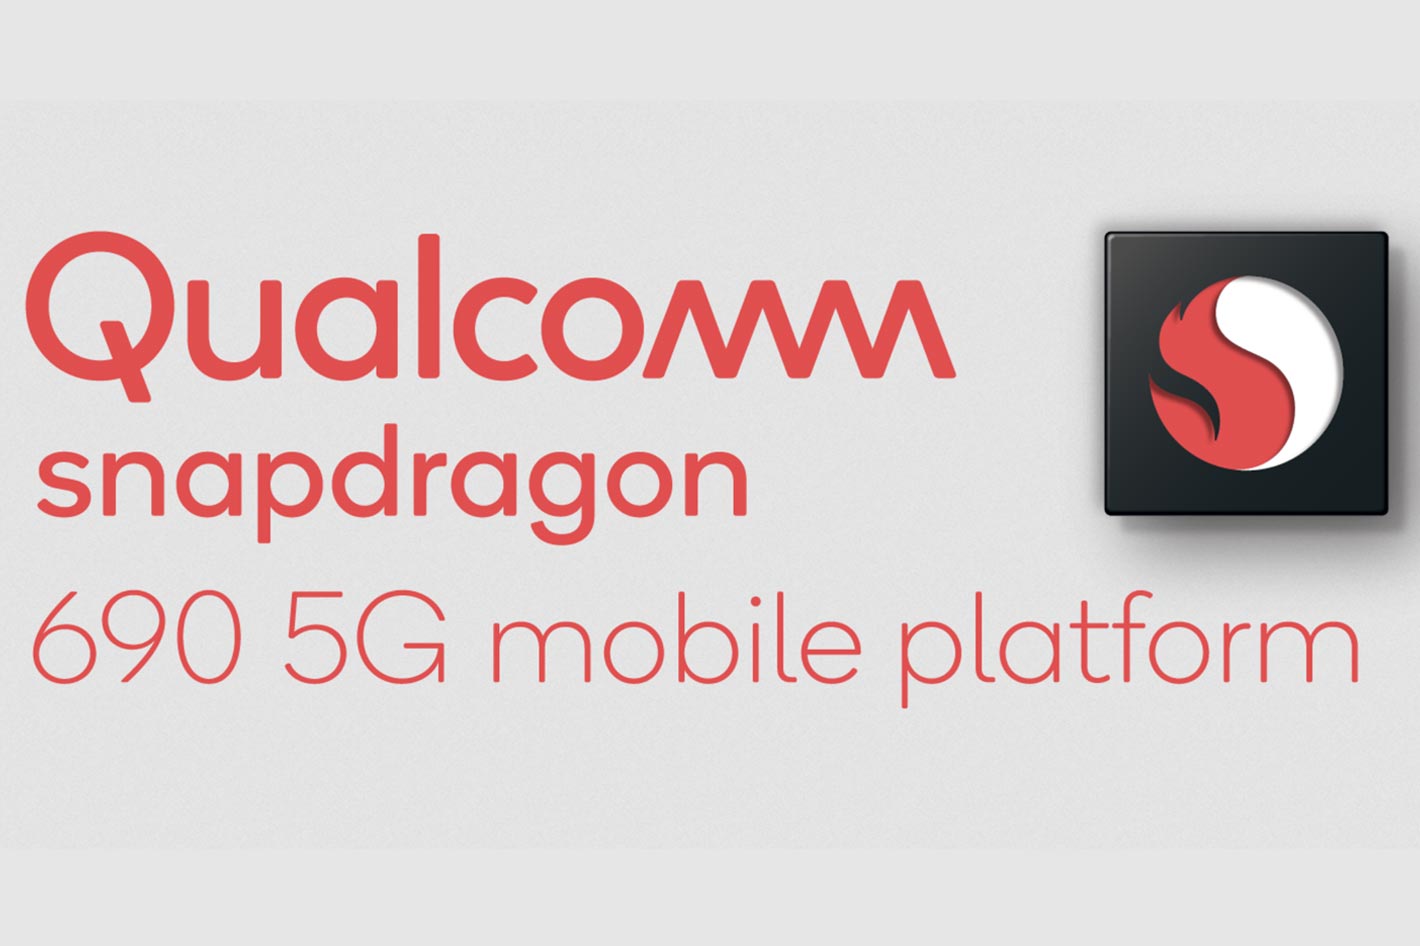 Qualcomm Snapdragon 690 brings support for 4K HDR and 120hz displays